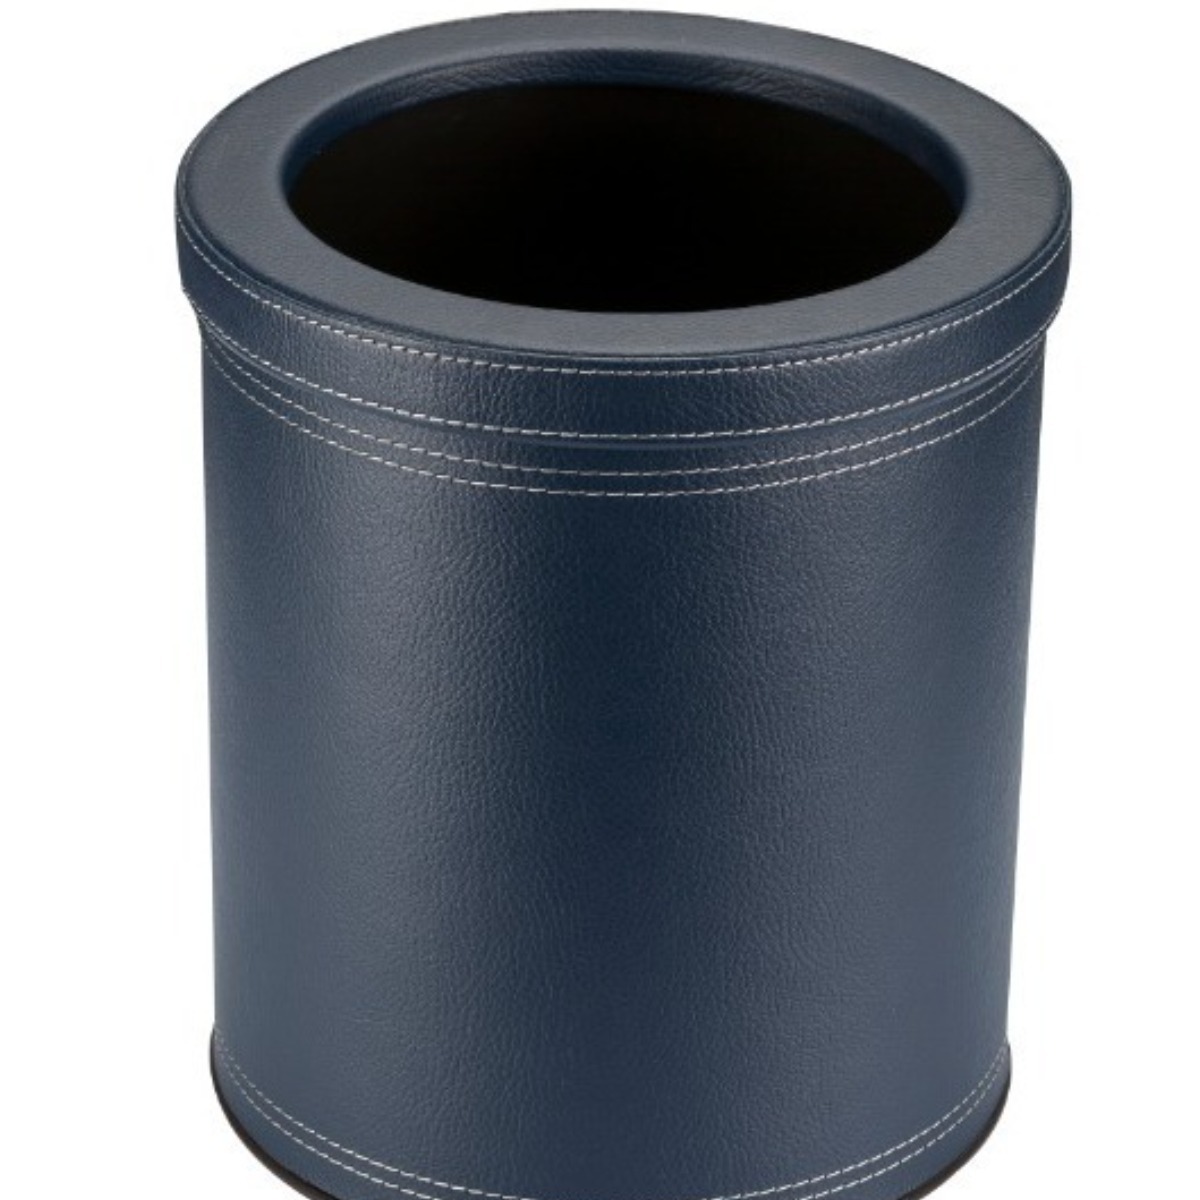 AB-316 Leather Lined Dustbin